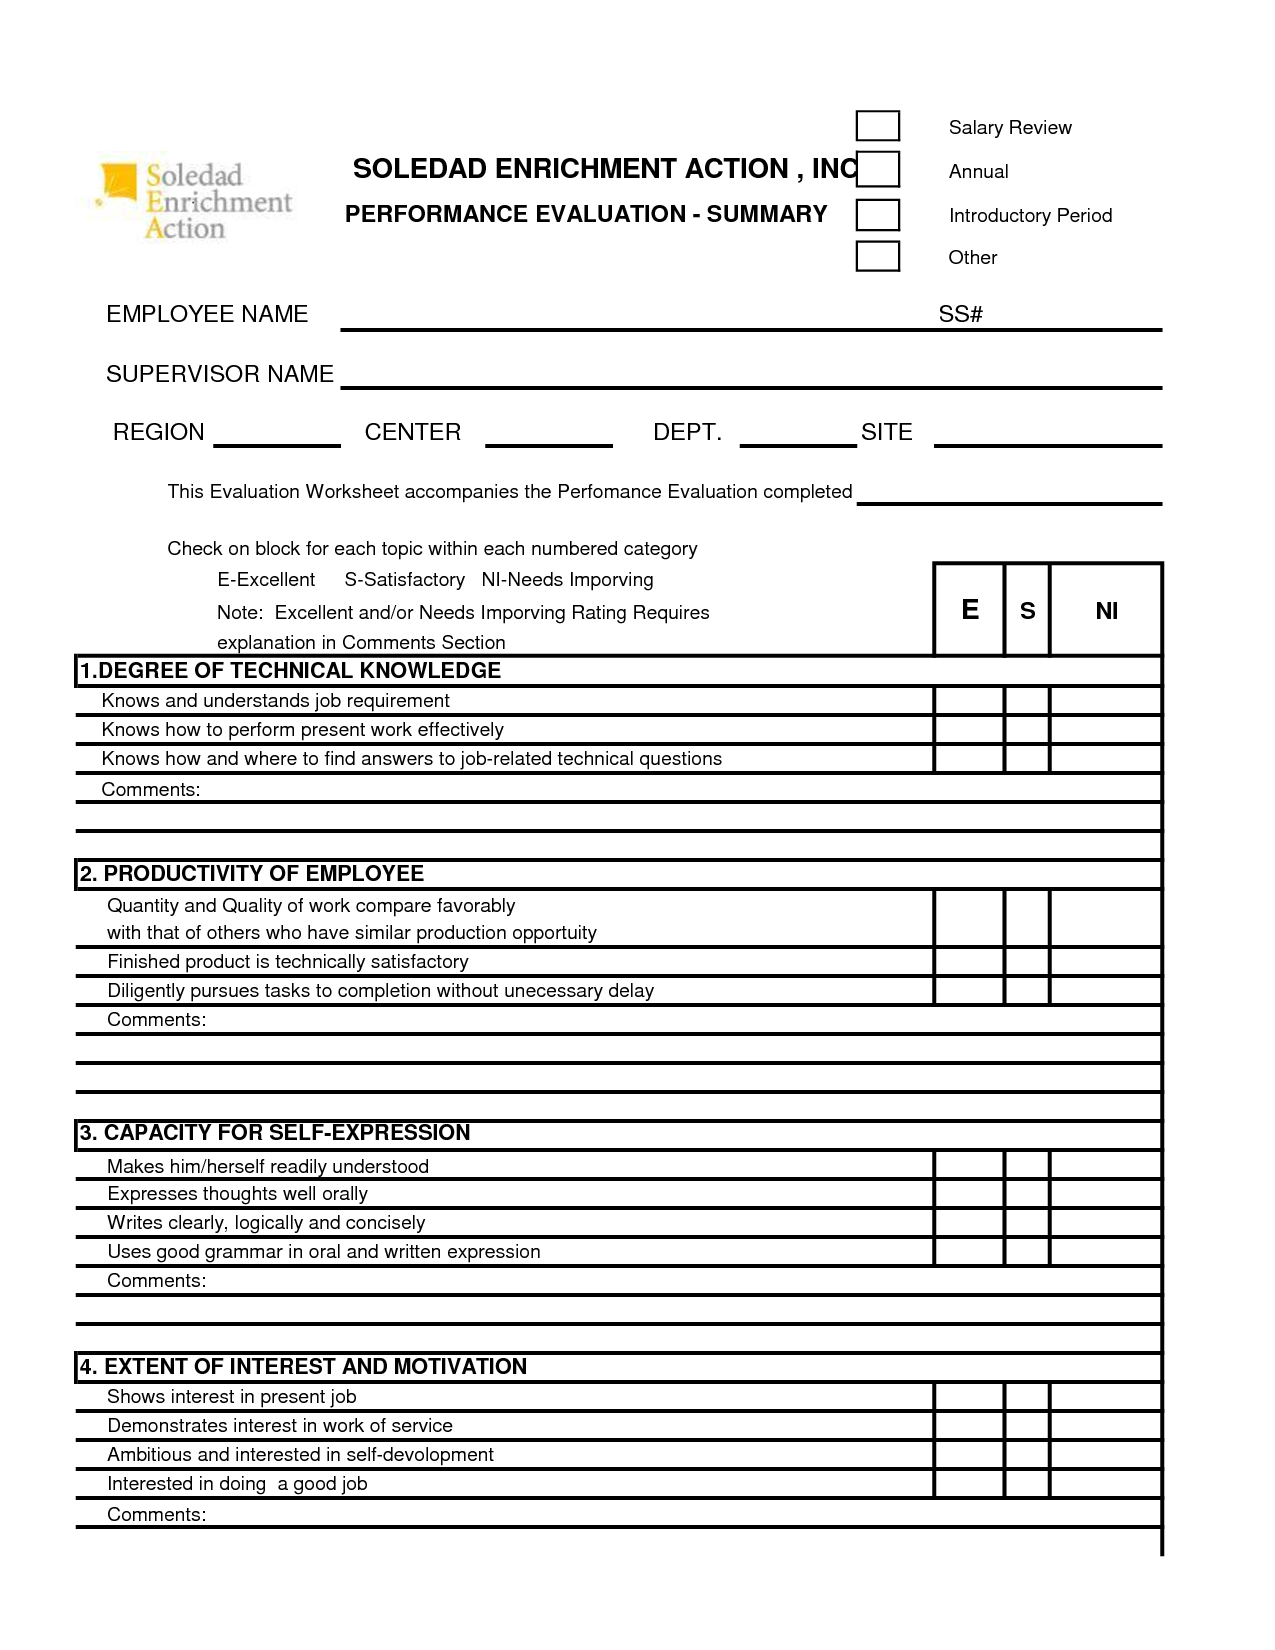 Free 360 Performance Appraisal Form Google Search 